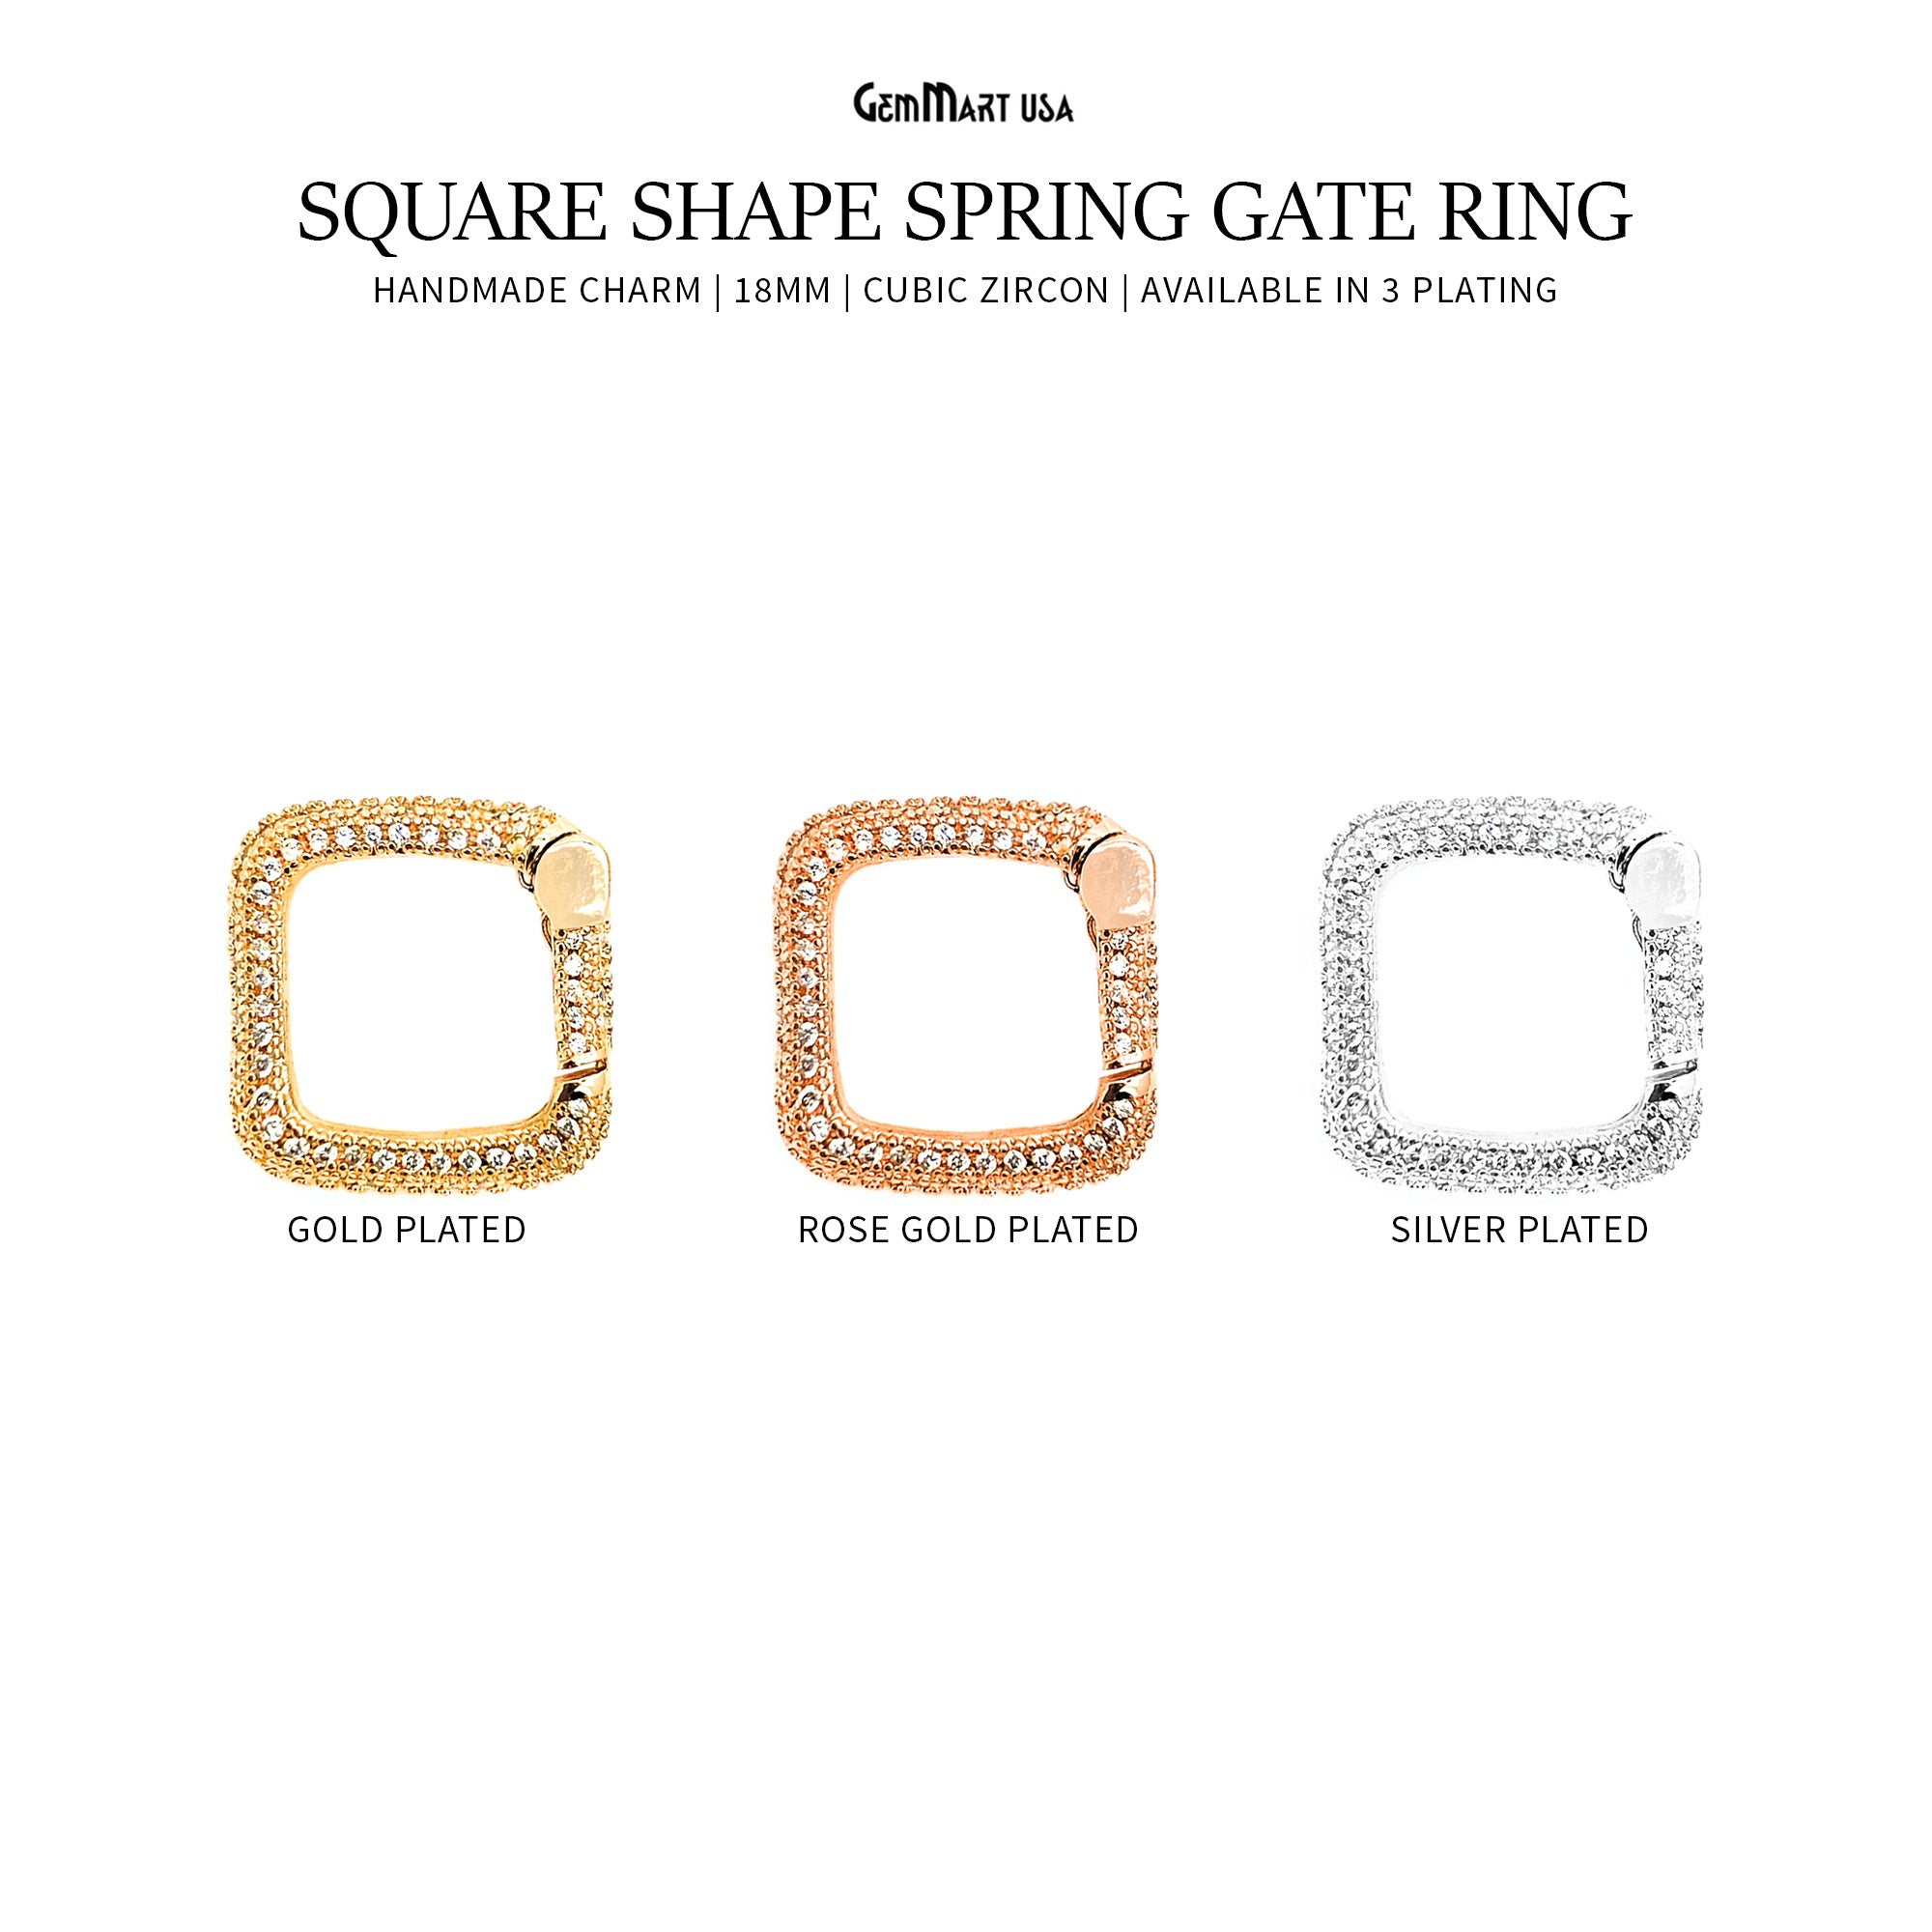 Dainty CZ Pave Square Spring Gate Ring 18mm Square Push Gate Ring-Jewelry Making Findings